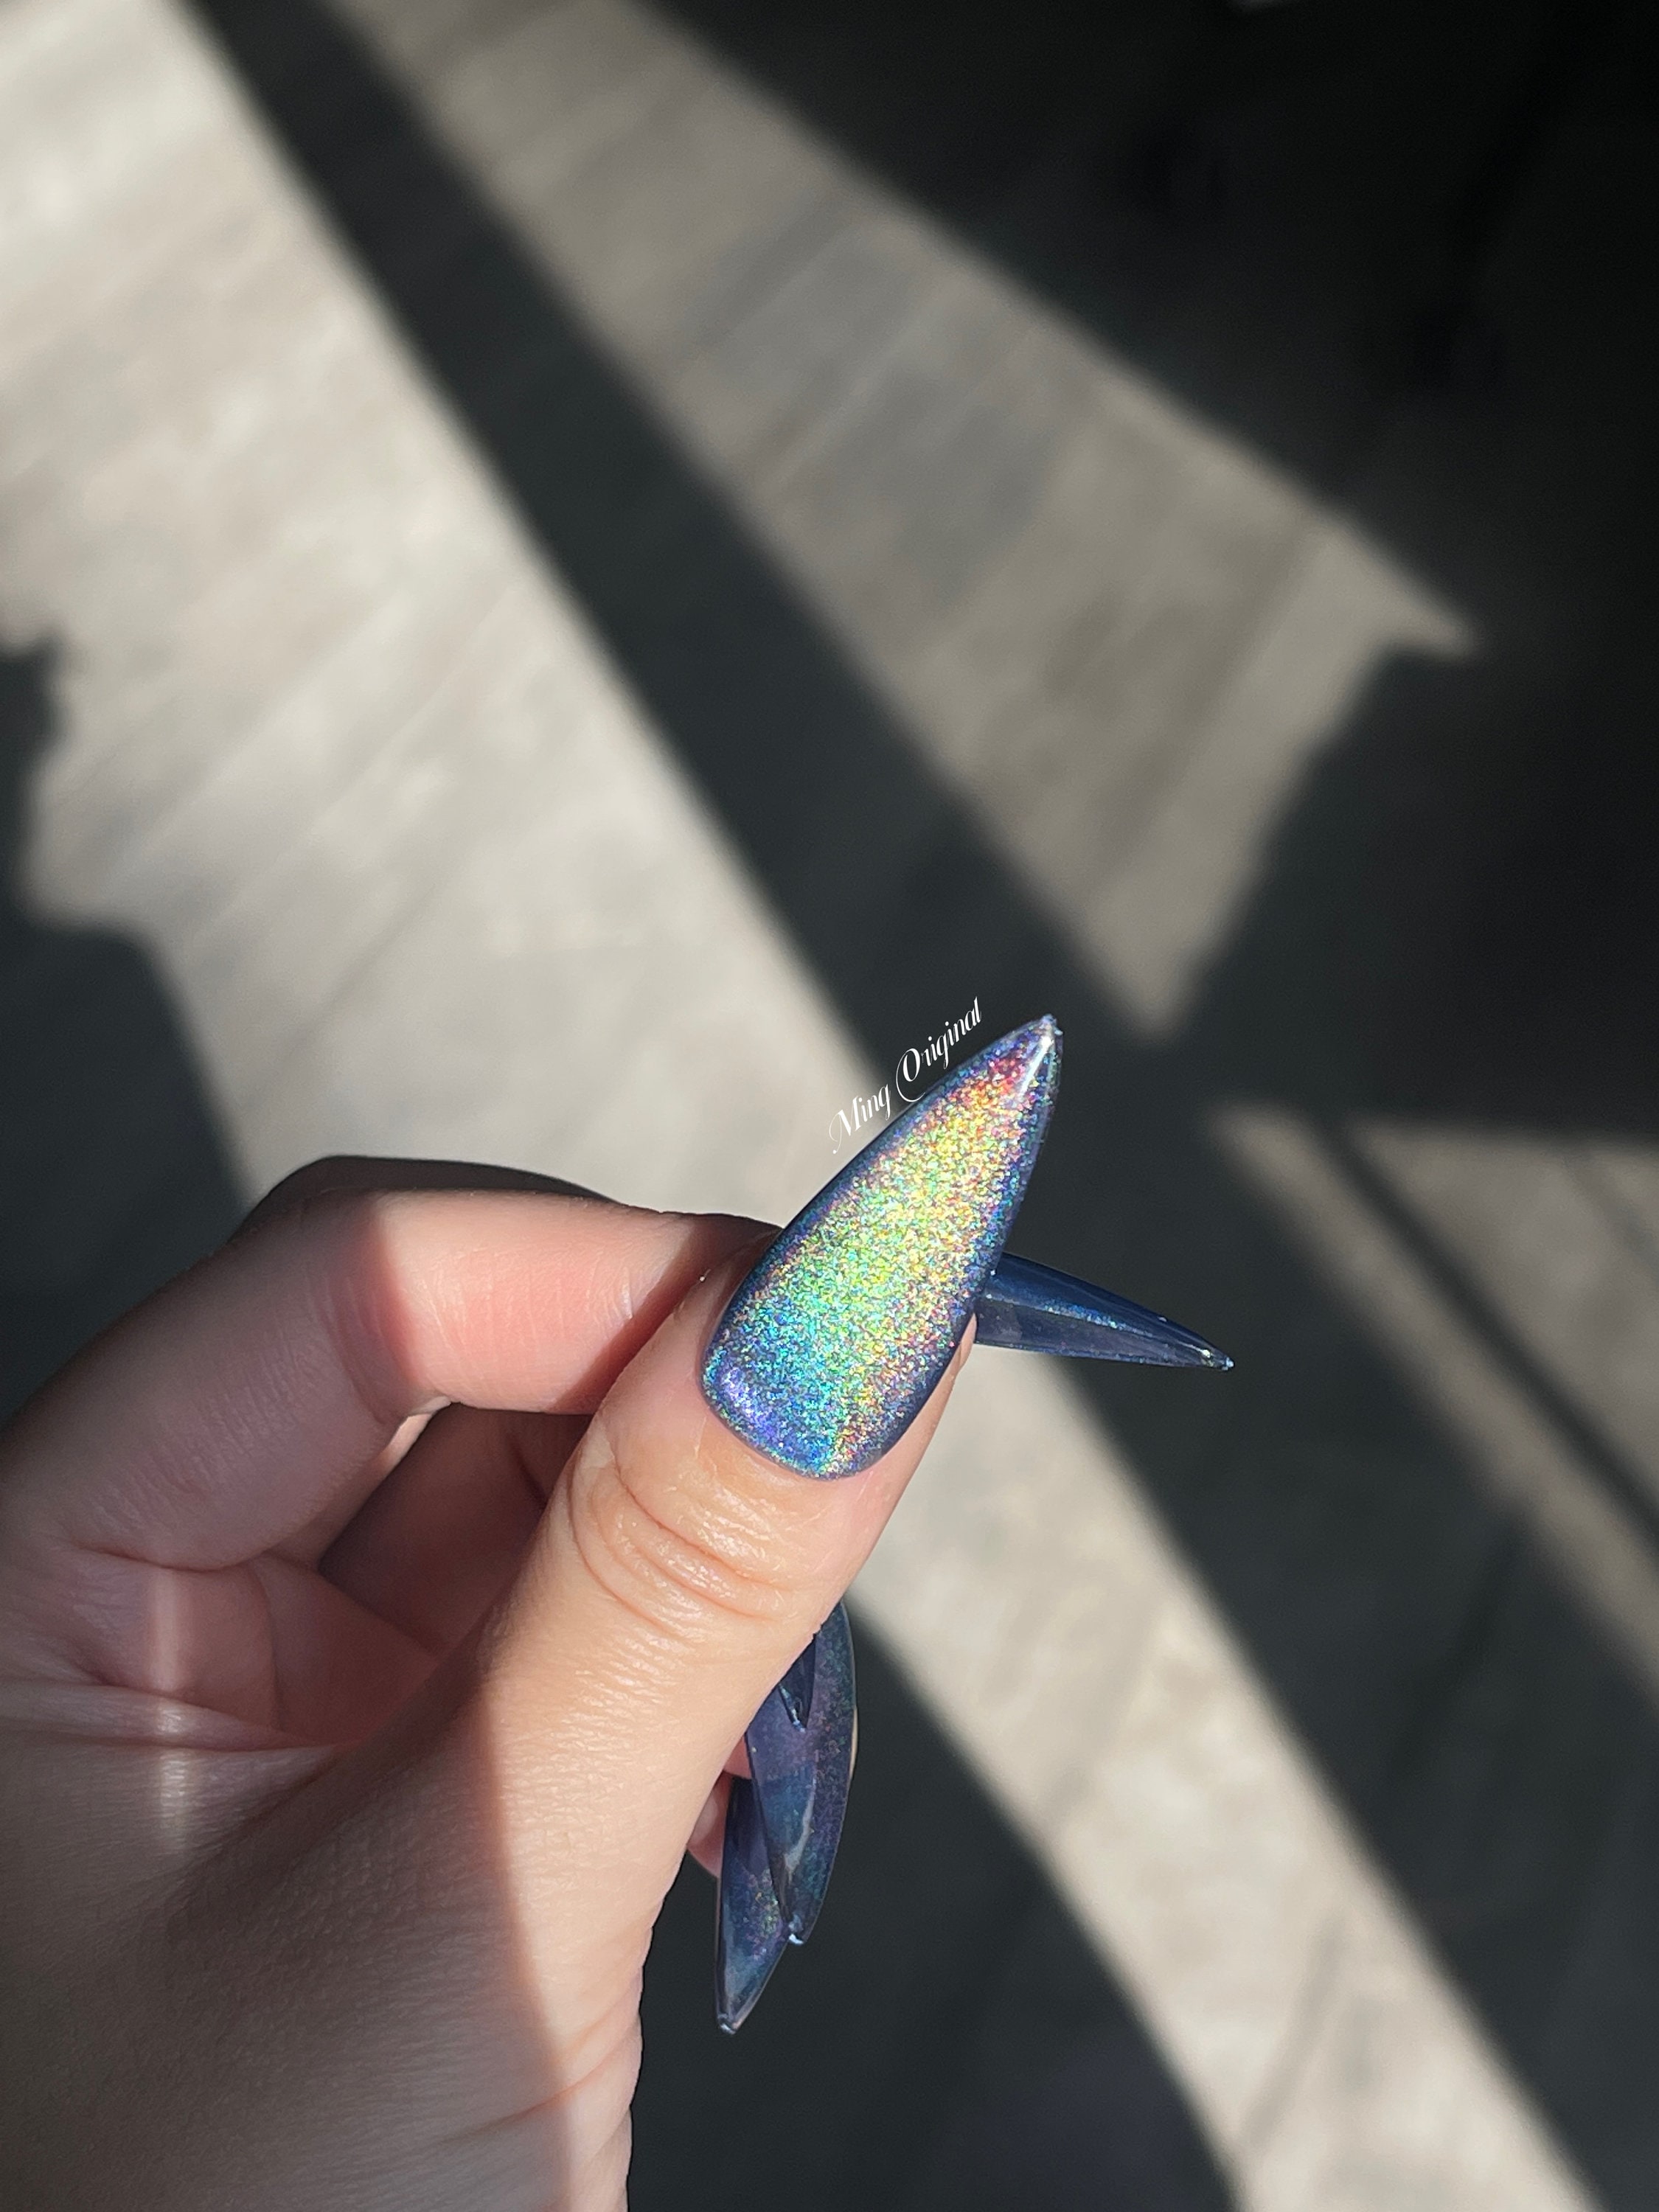 Silver Holographic Sugar Glitter Acrylics and Press on Nails